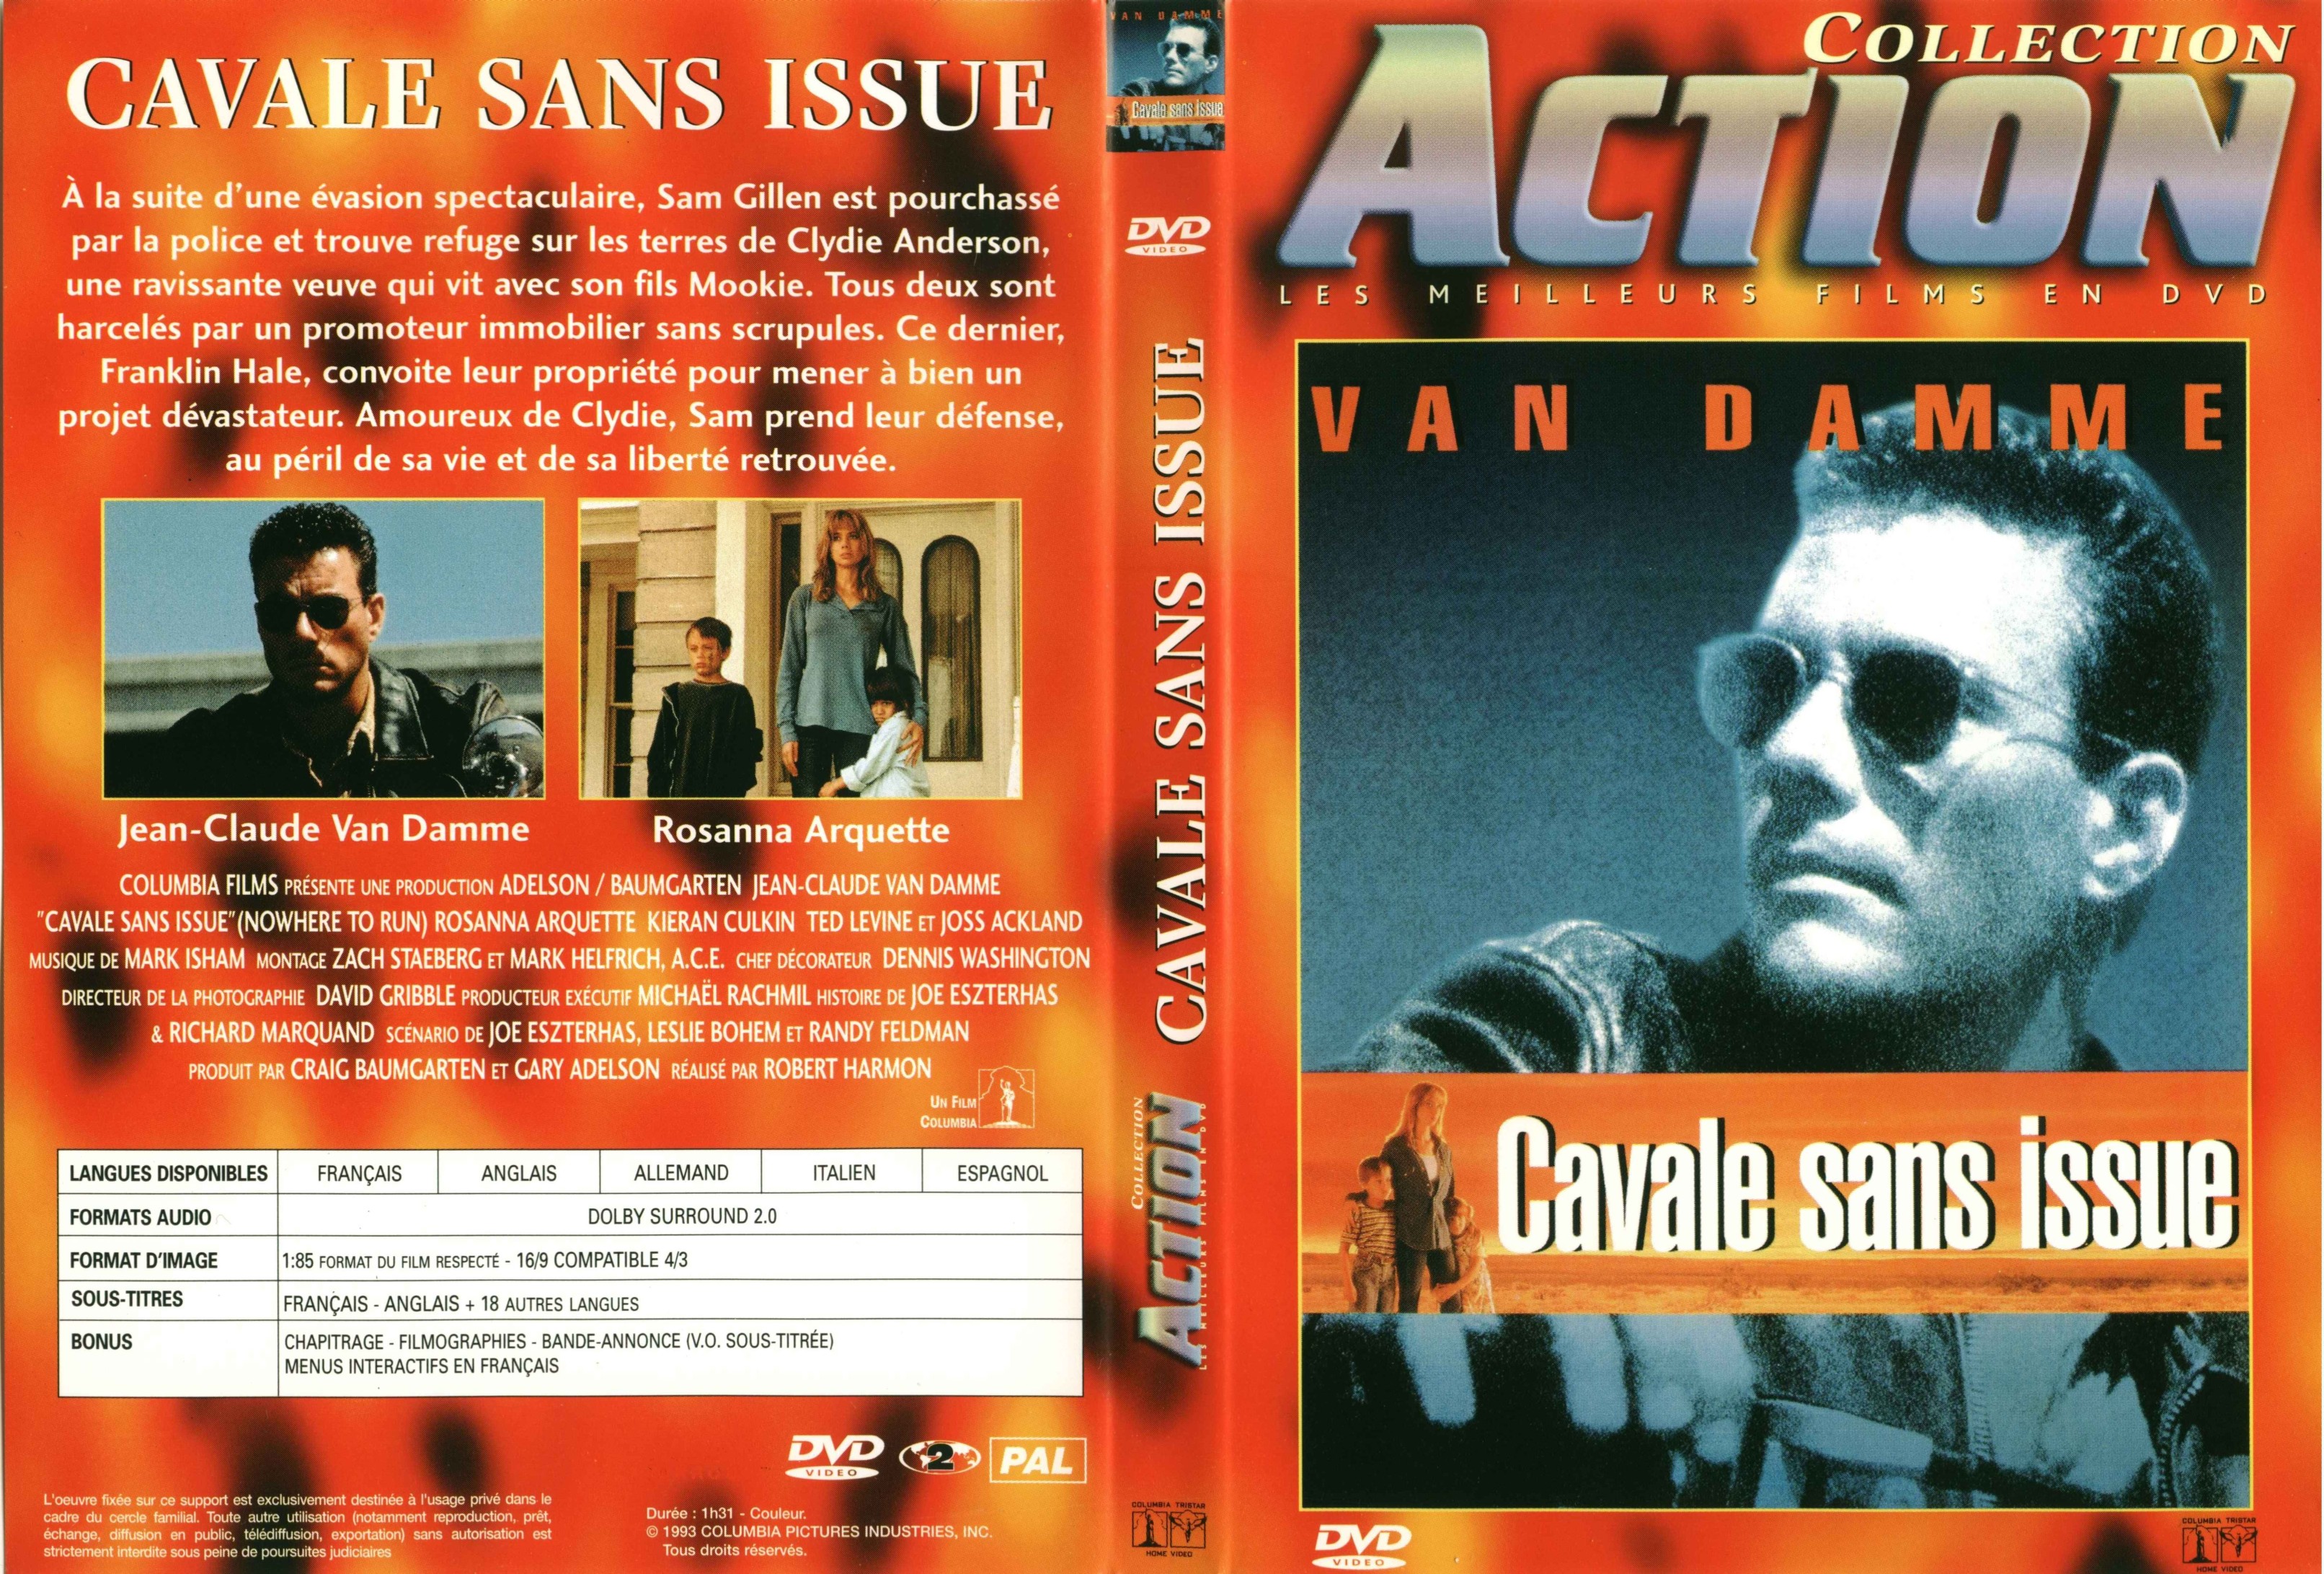 Jaquette DVD Cavale sans issue v2